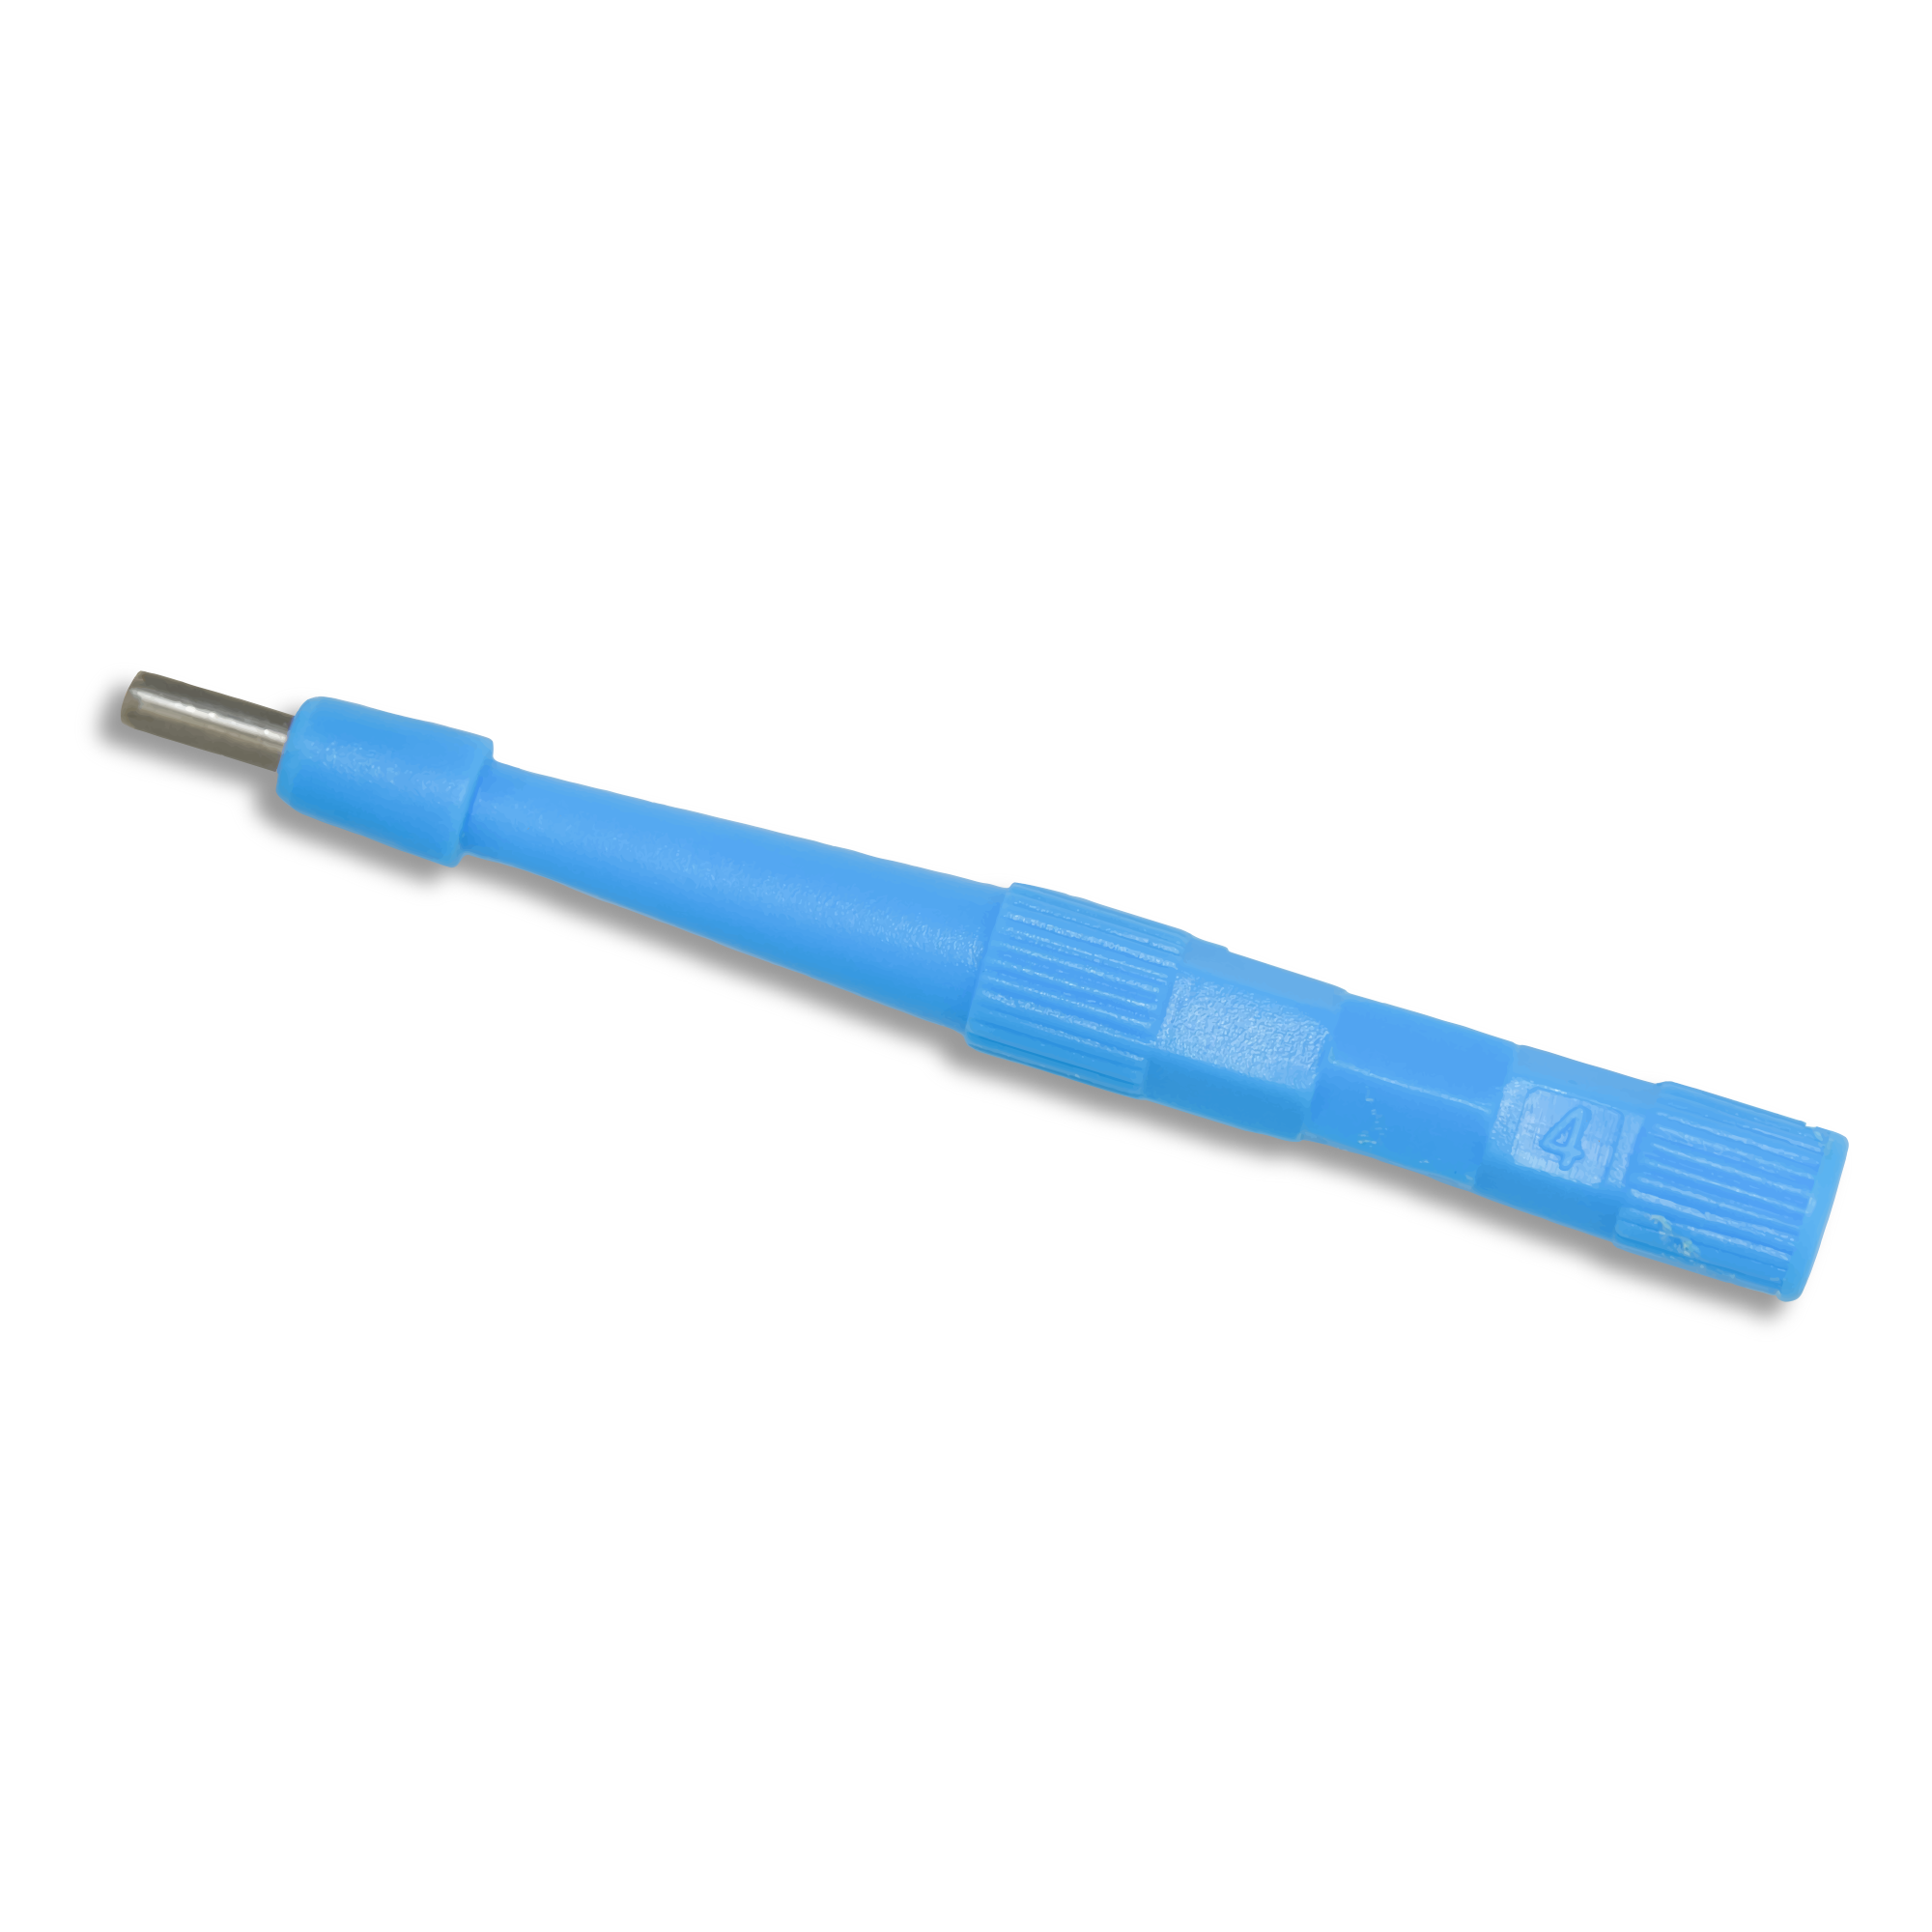 4mm Biopsy Punch Tool - SurgiReal